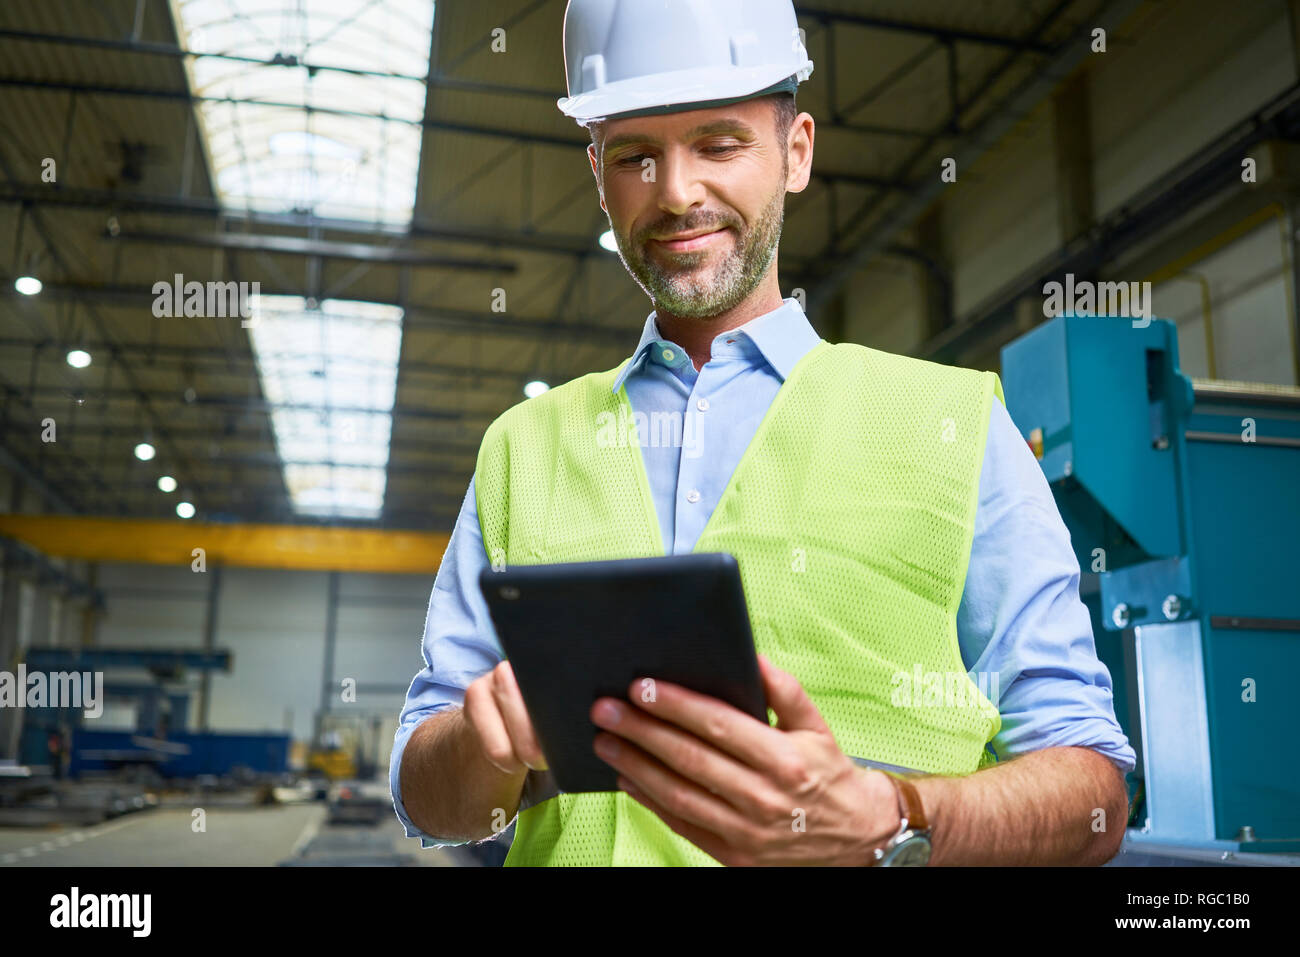 Confident man wearing shirt and safety vest using tablet in factory Stock Photo